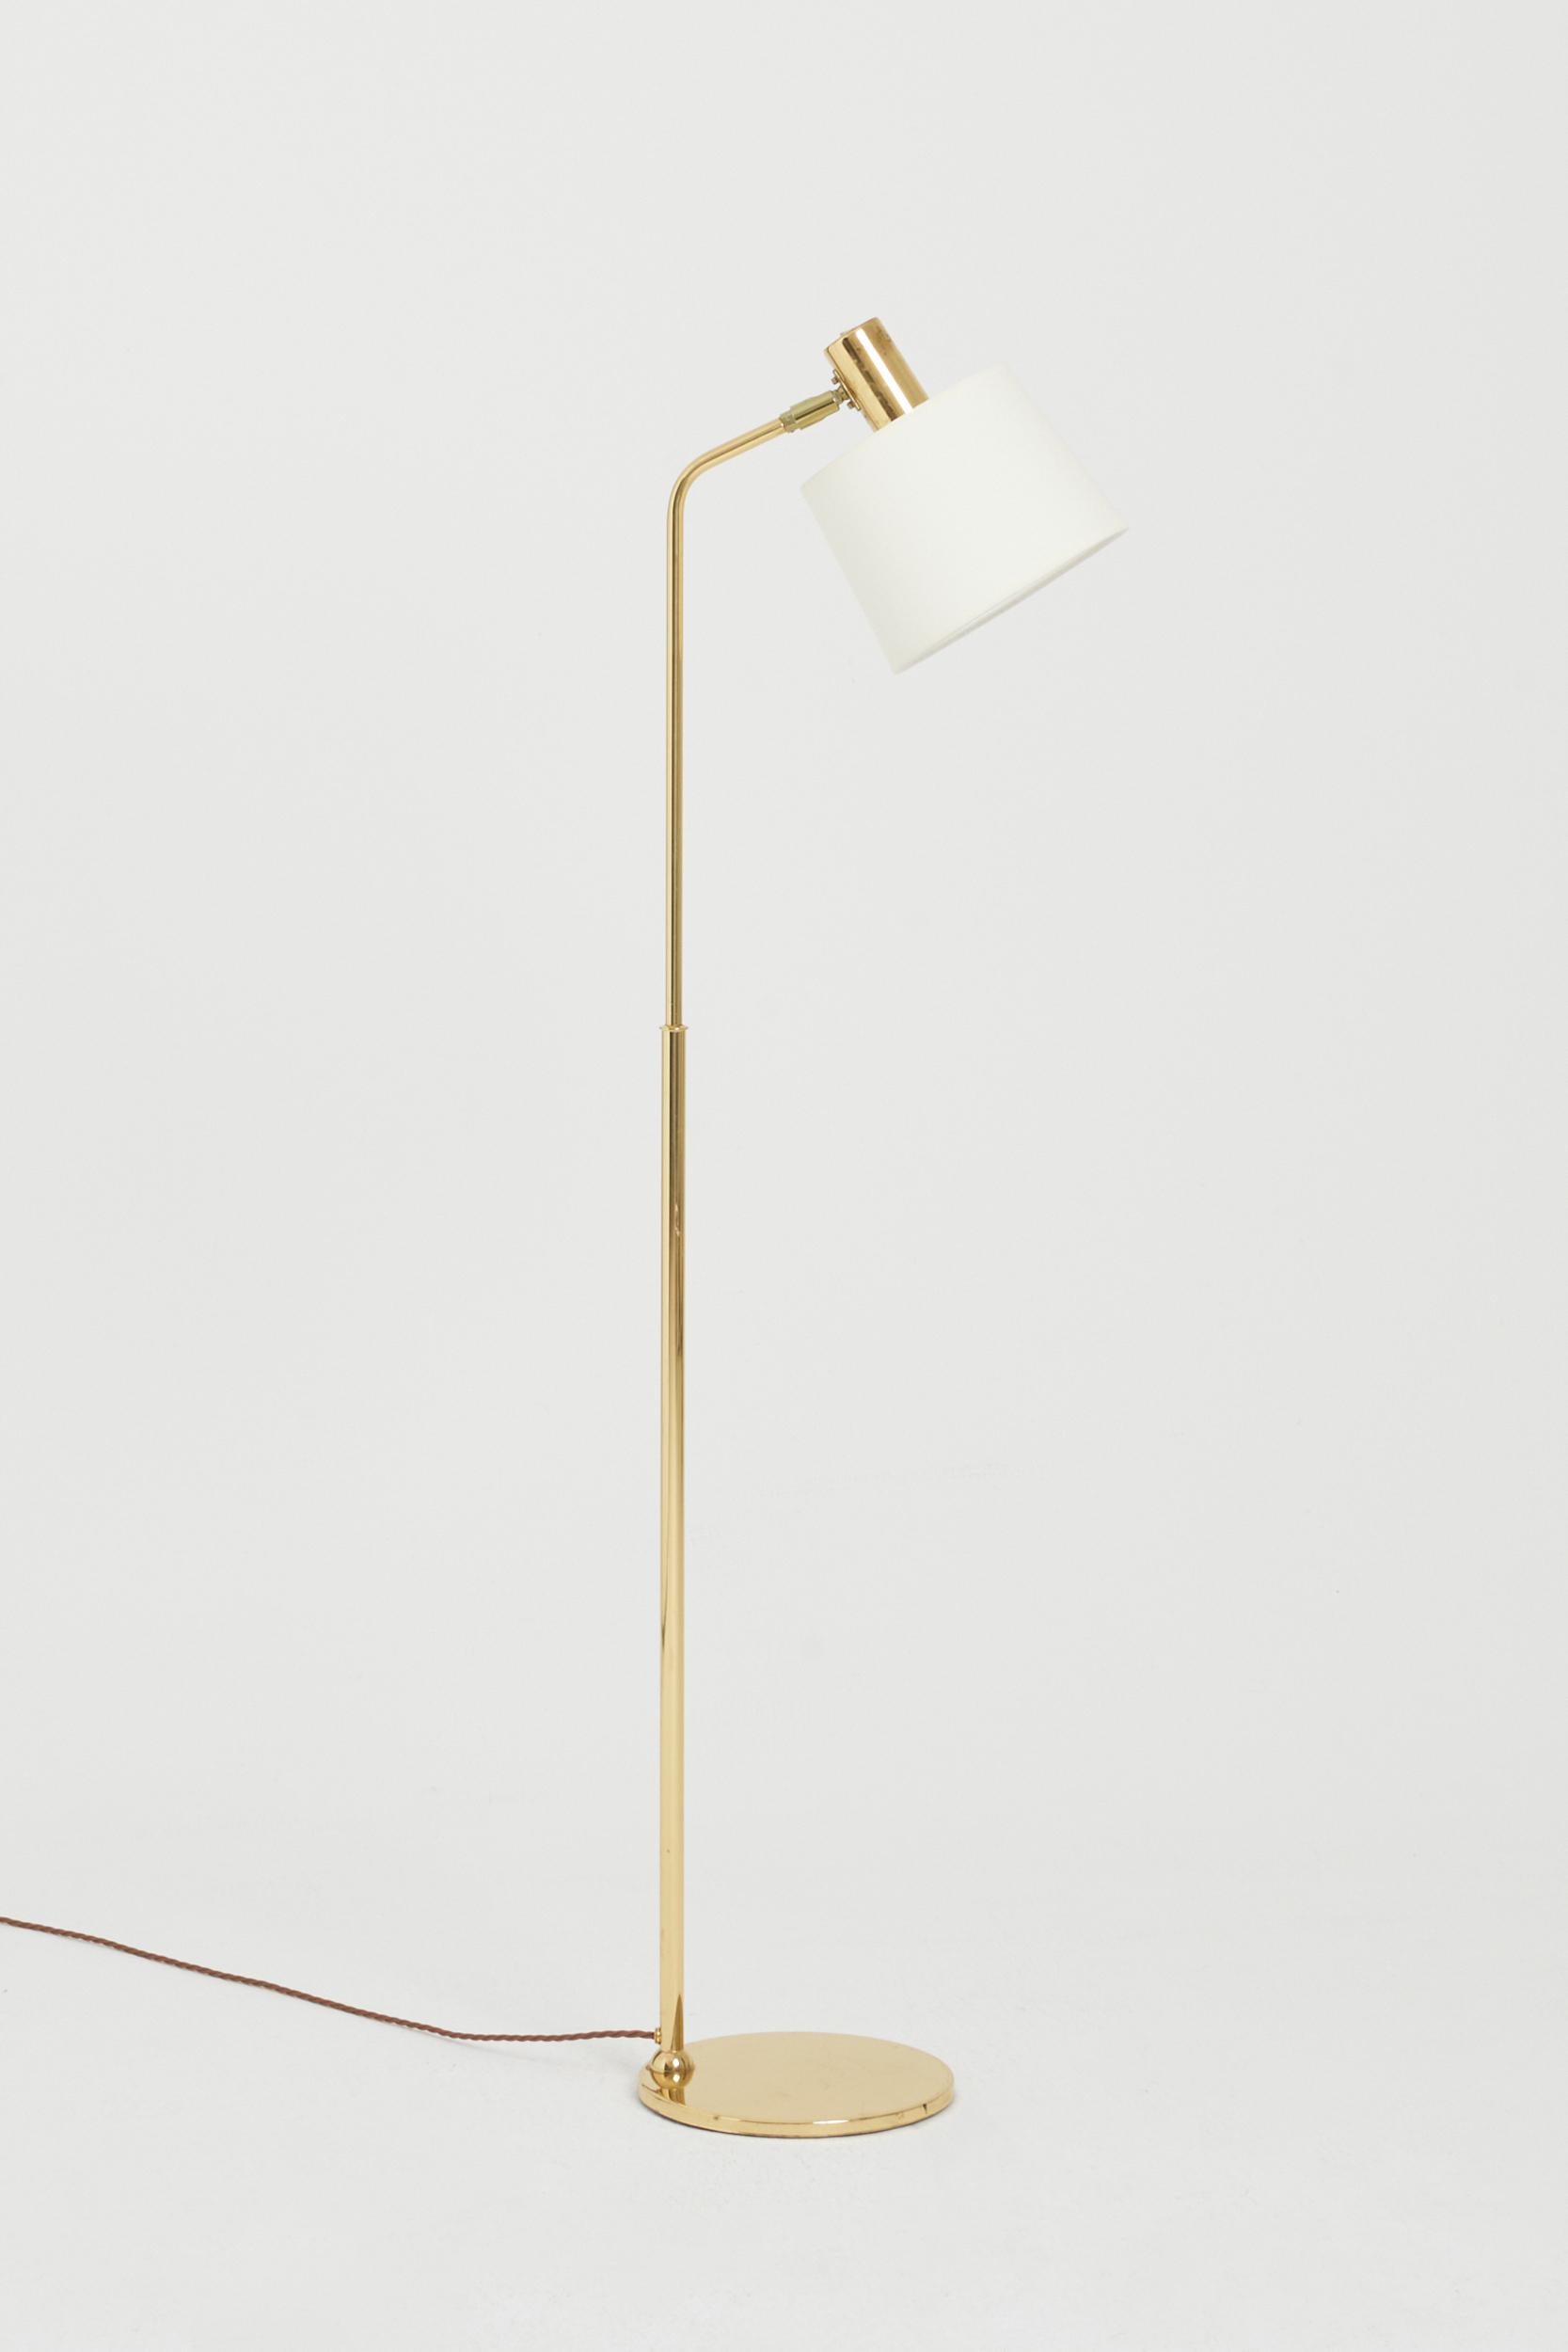 A brass reading floor lamp 
Sweden, 1970s
137 cm high by 25 cm wide by 40 cm depth